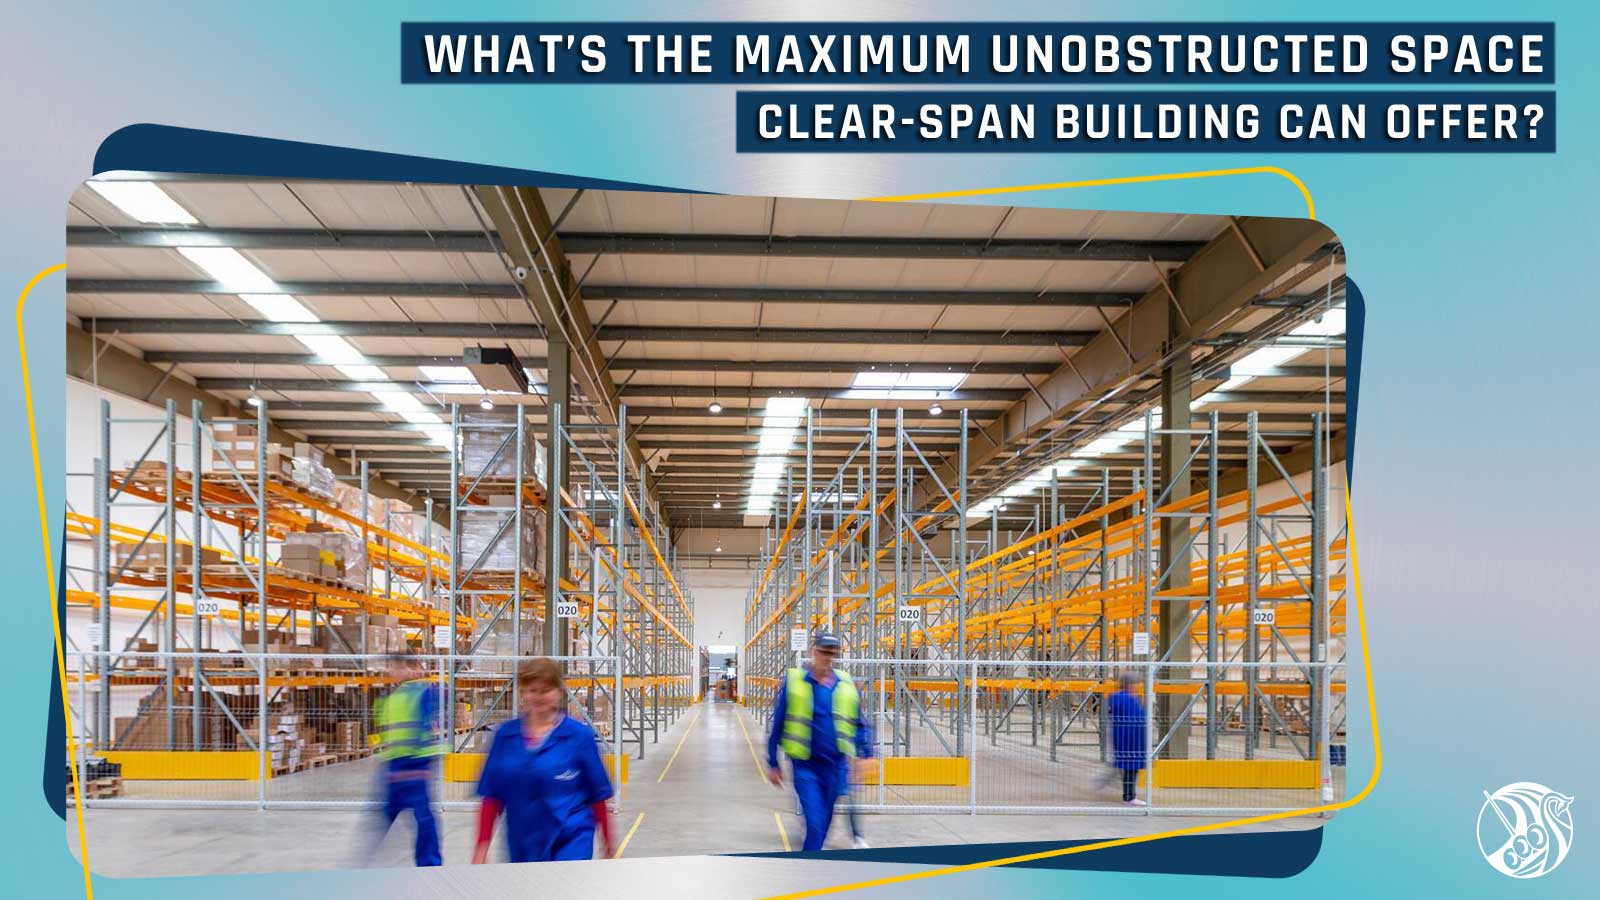 What’s the Maximum Unobstructed Space Clear-Span Building Can Offer